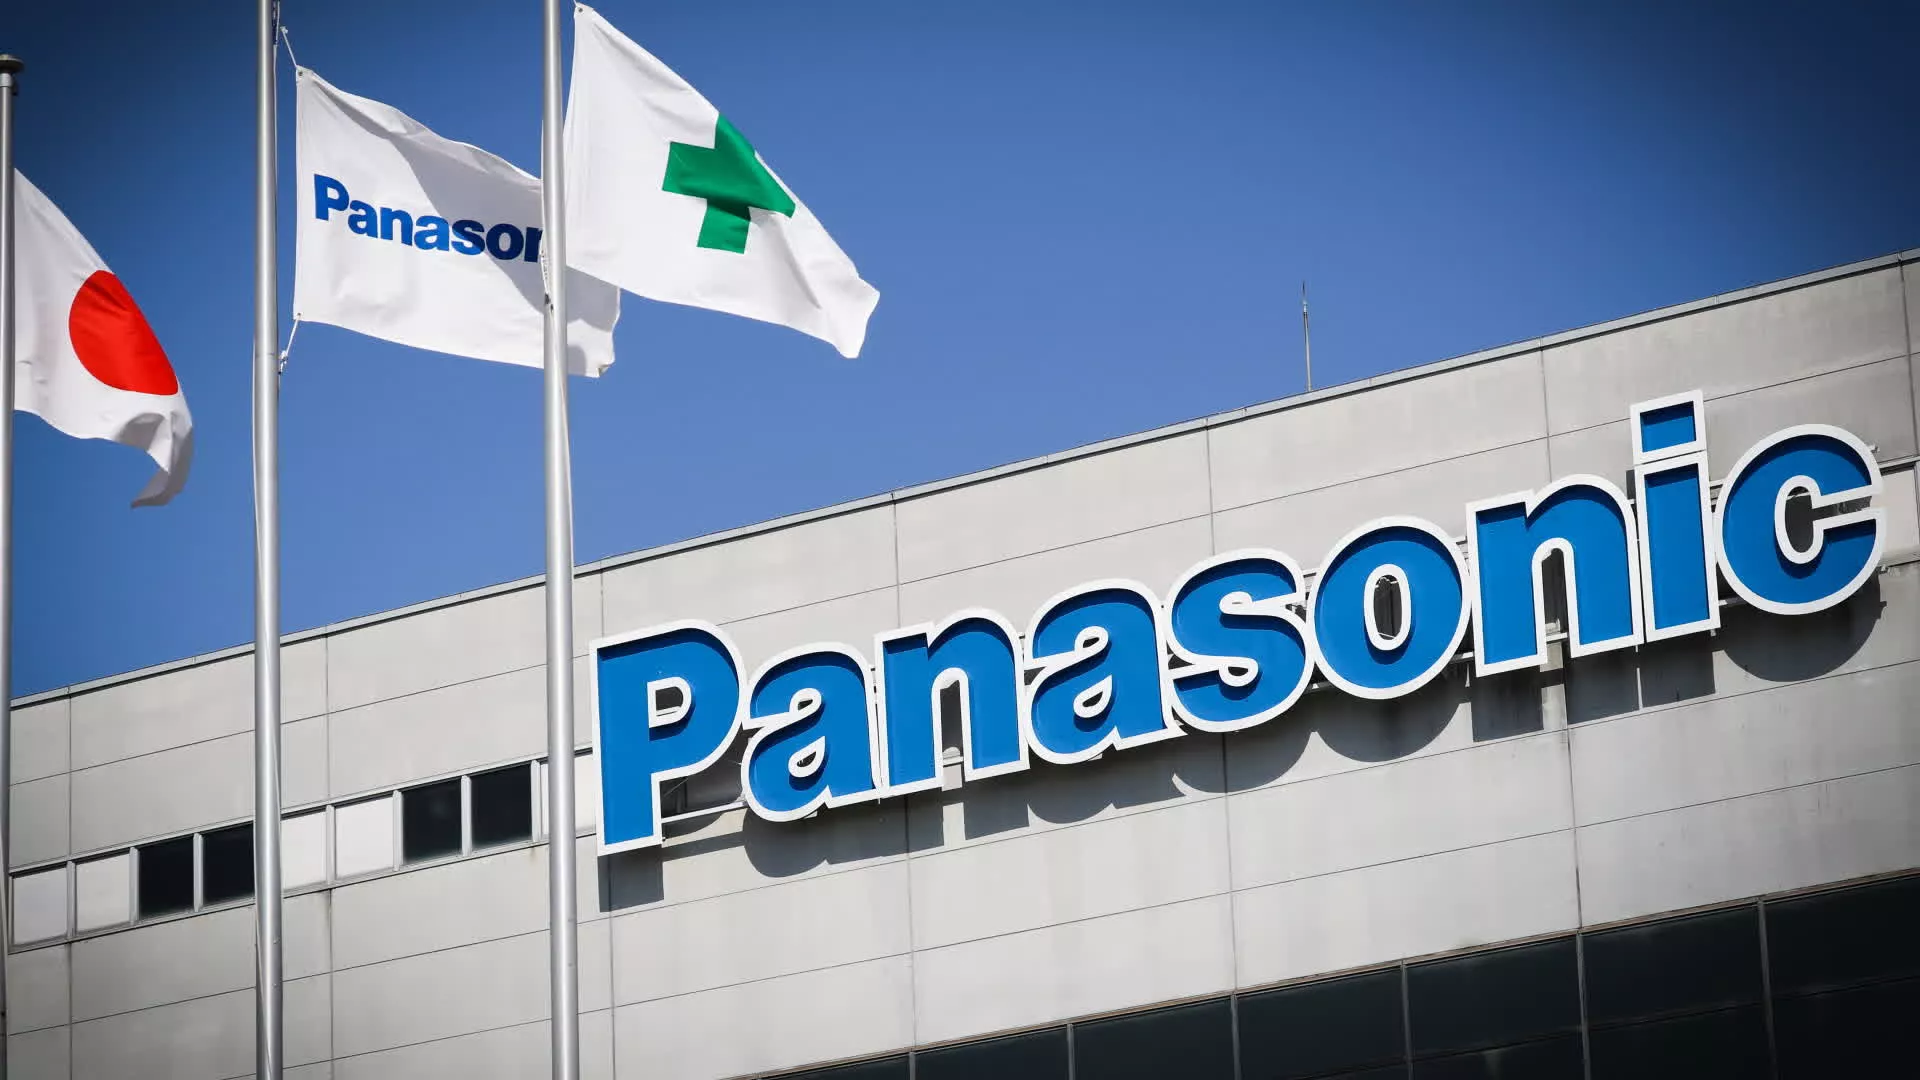 Panasonic will build one of the world's largest EV battery factories in Kansas